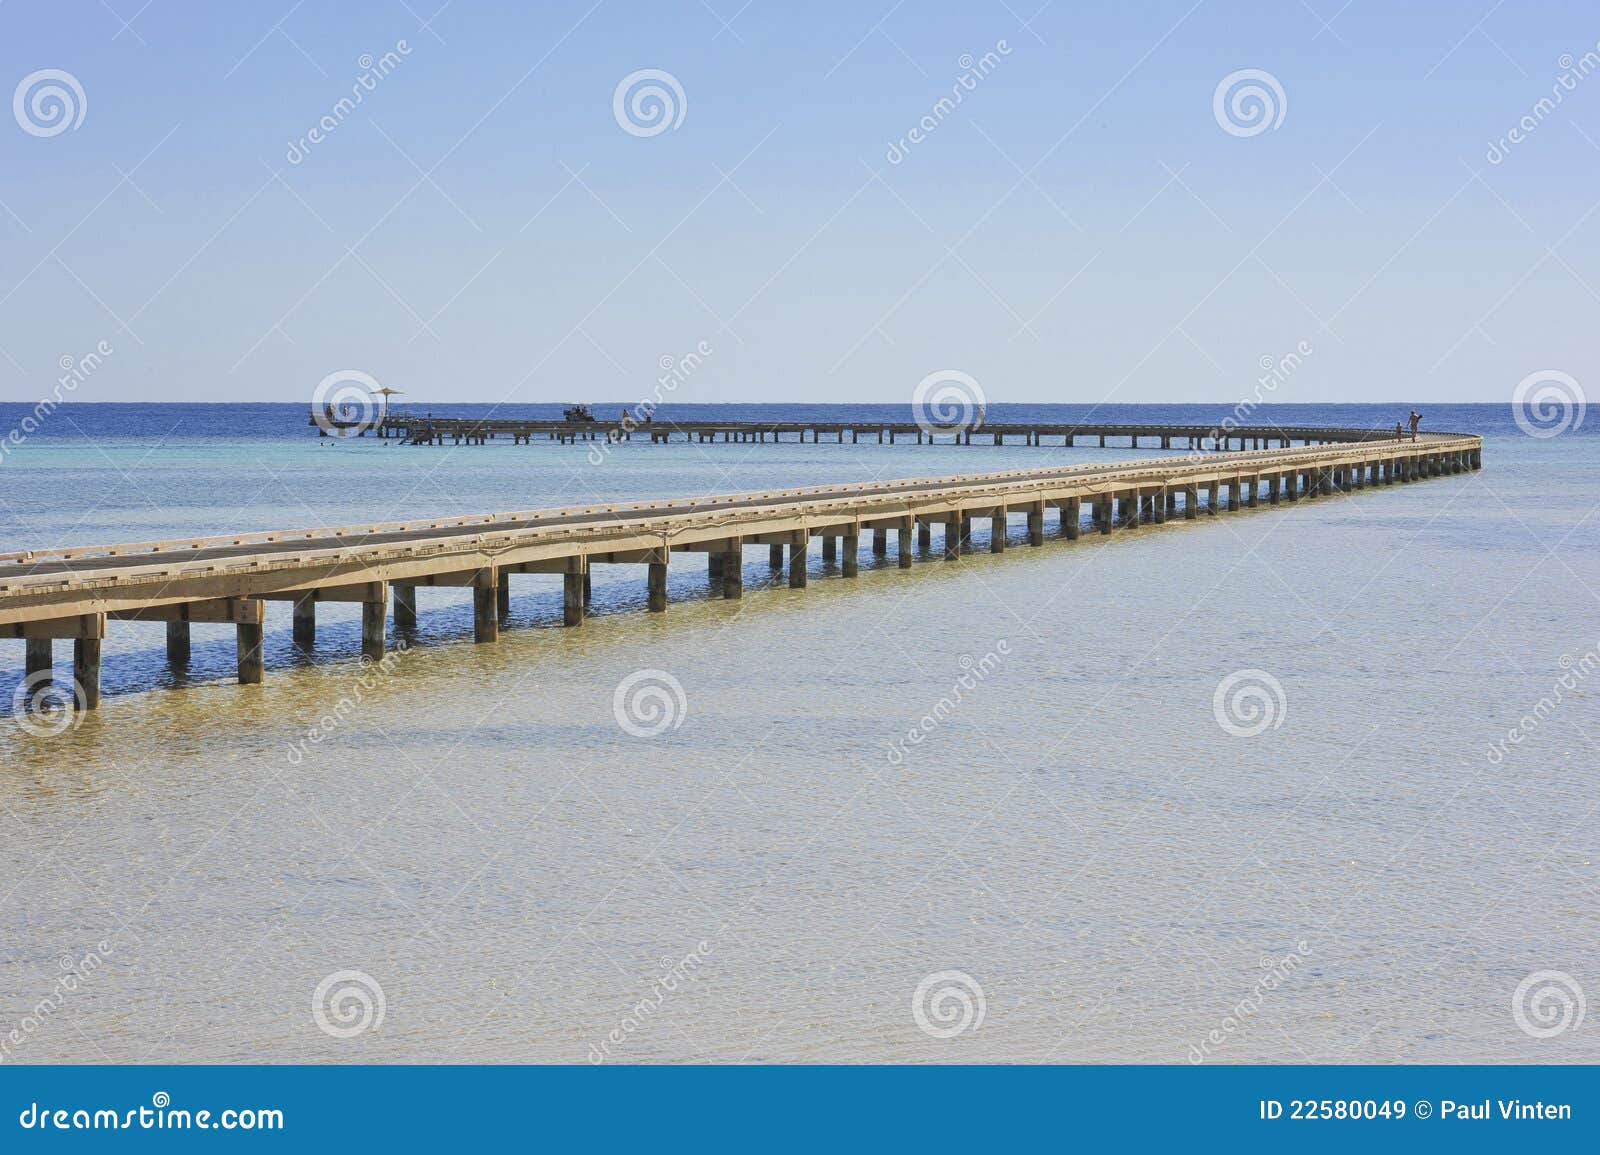 Long wooden jetty going out over a tropical coral reef.